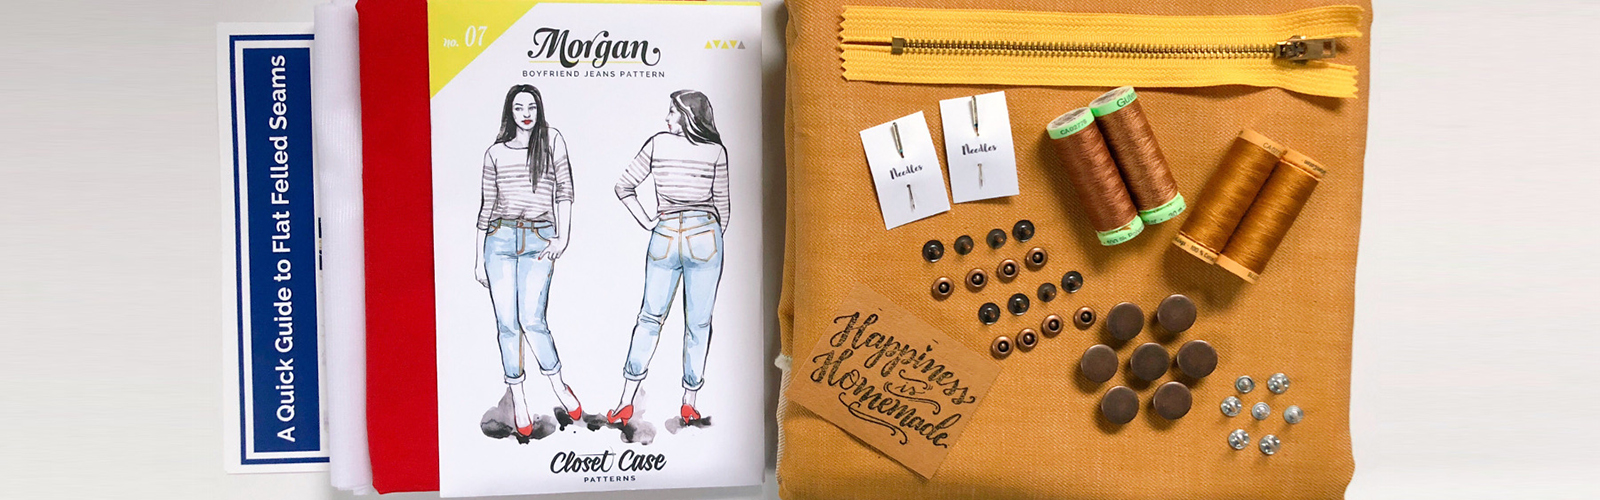 Needle Sharp subscription kits come with everything needed to complete a sewing project, including pattern, fabric, thread, needles, and buttons.